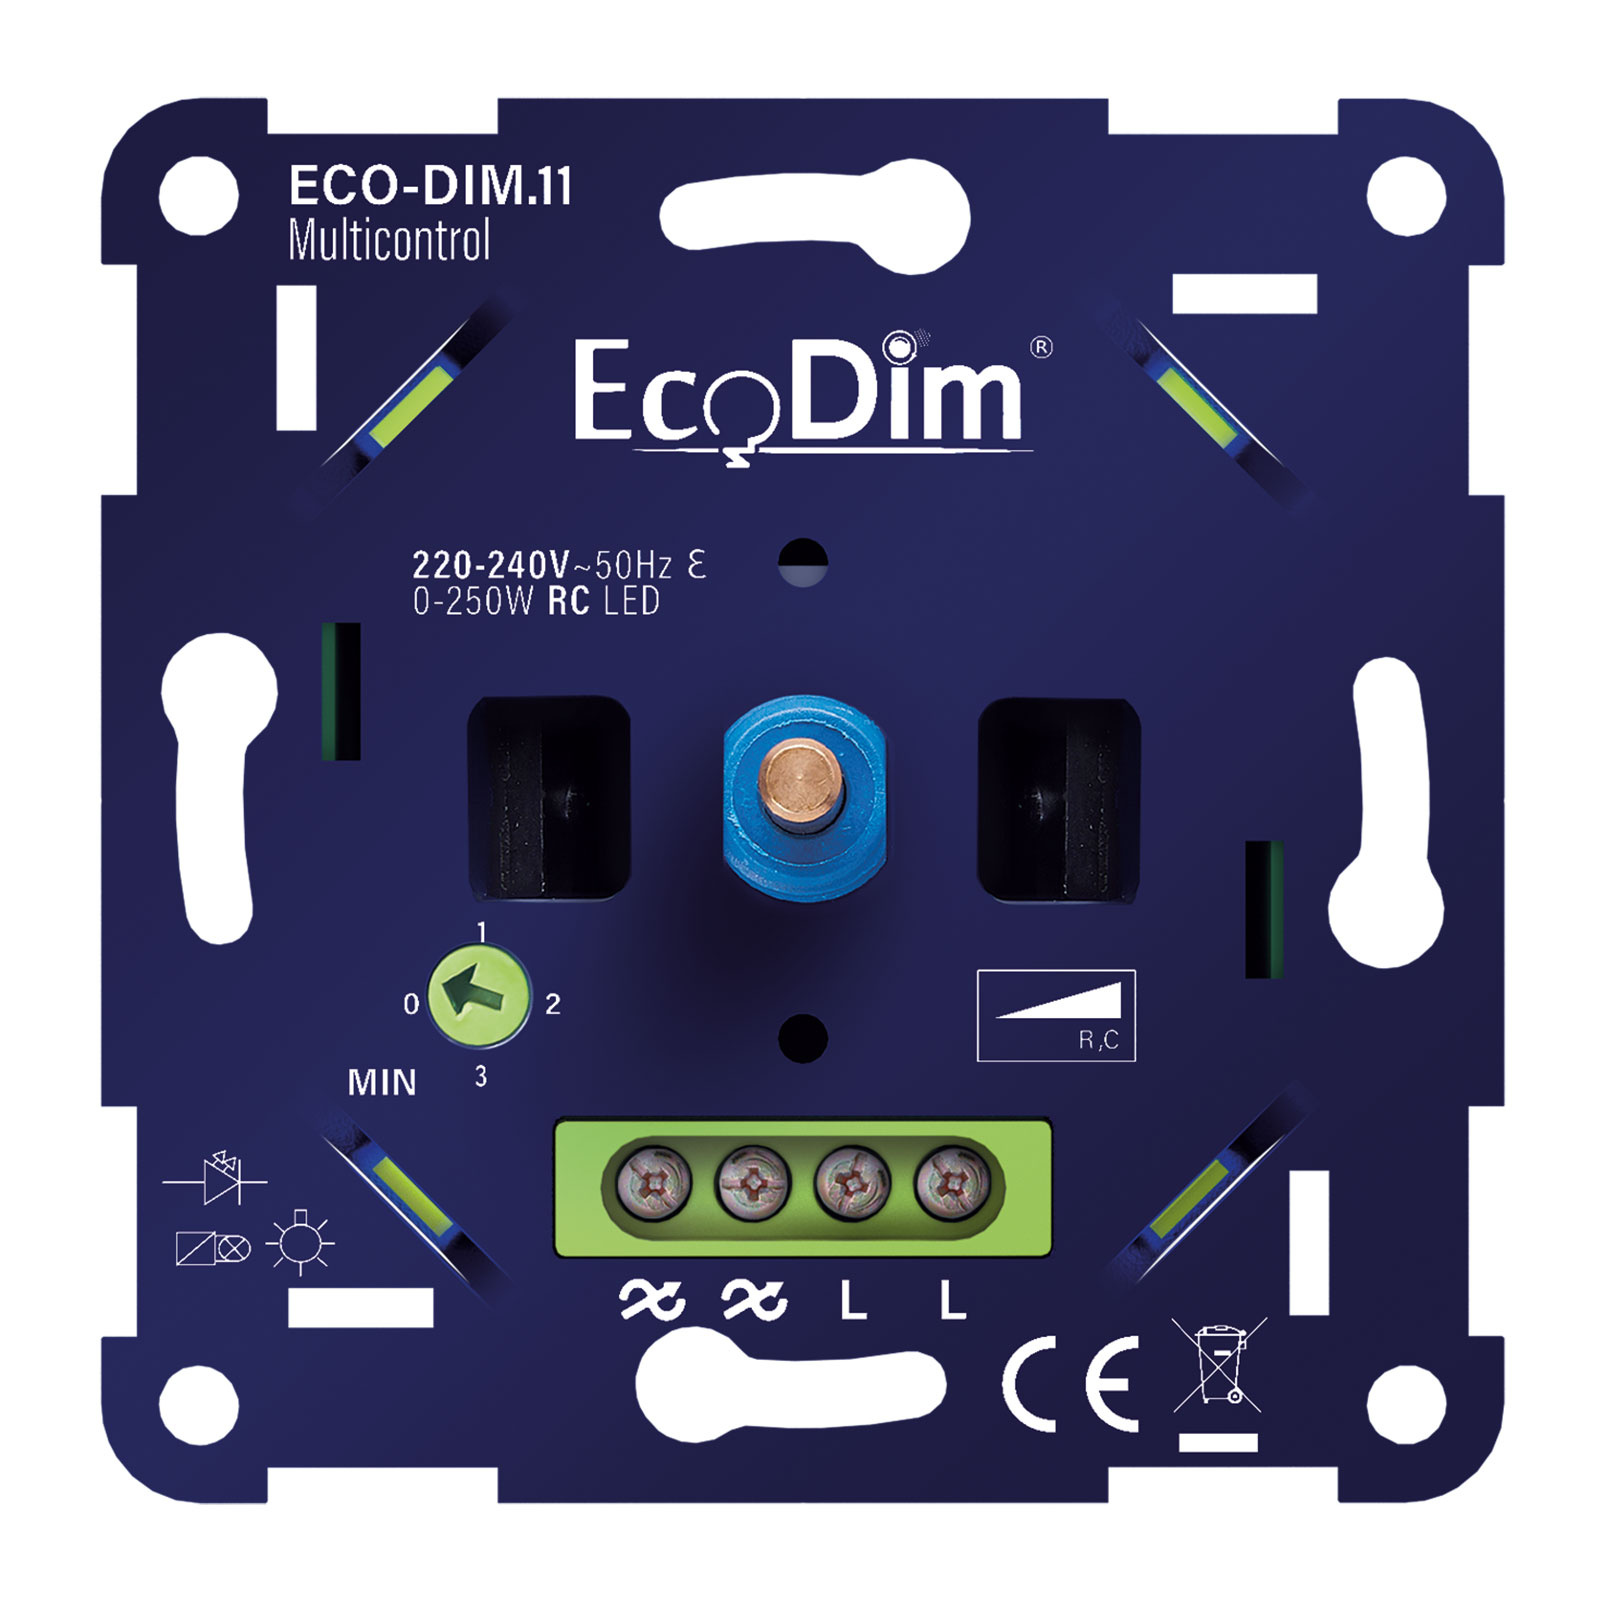 ECO-DIM.11 Multicontrol led dimmer universeel 0-250W (RC)